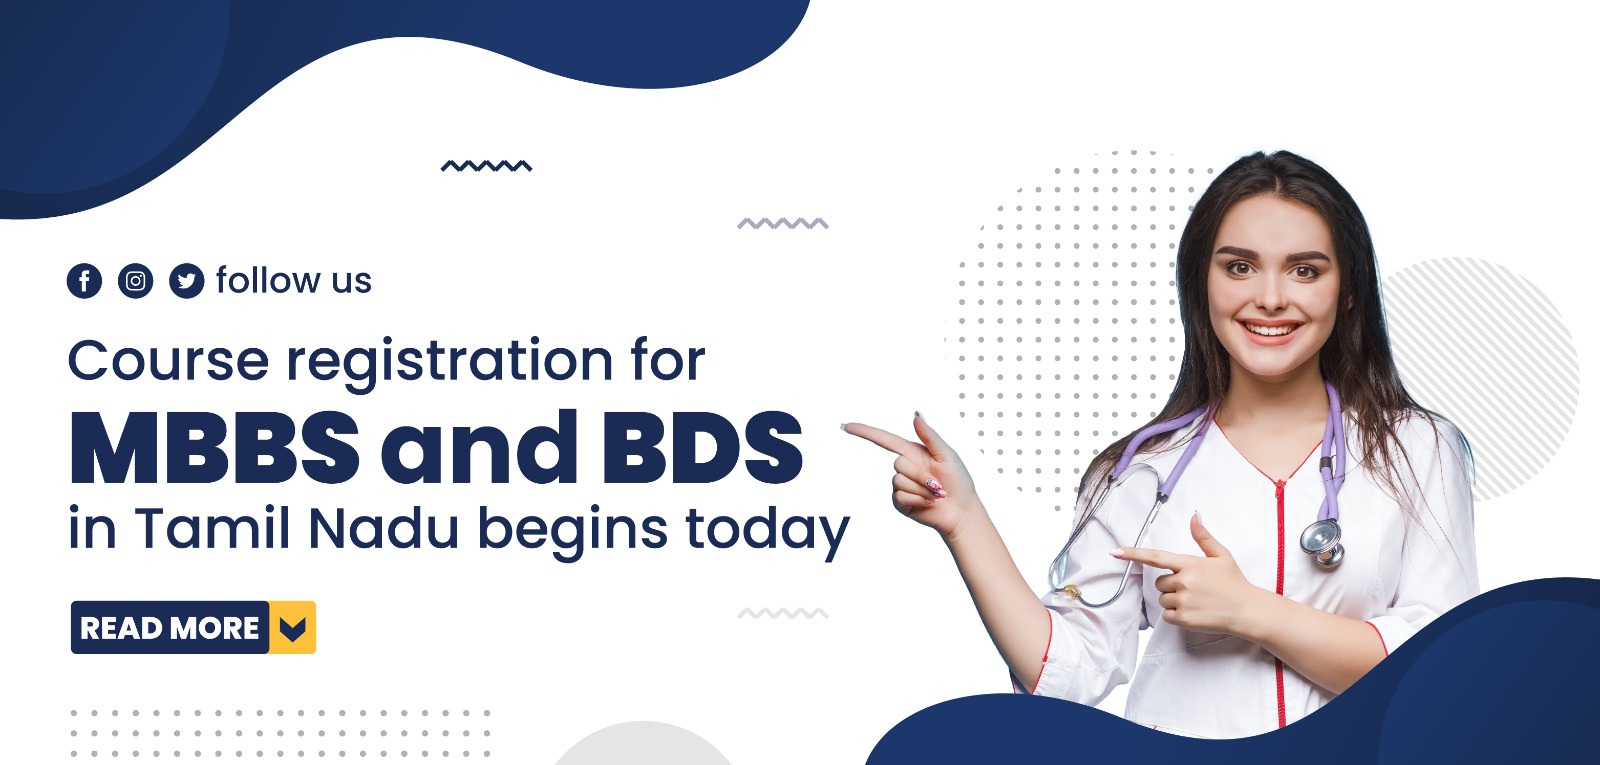 Course registration for MBBS and BDS in Tamil Nadu begins today